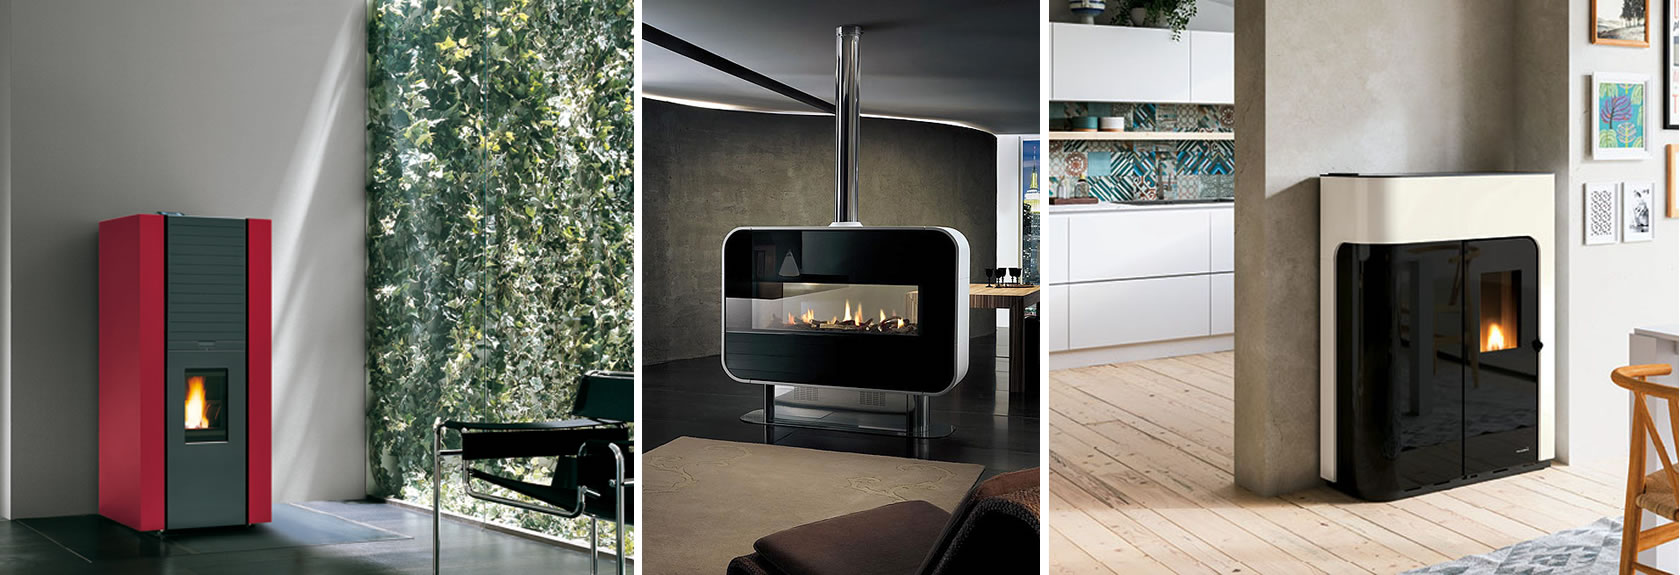 Stylish heating for your home